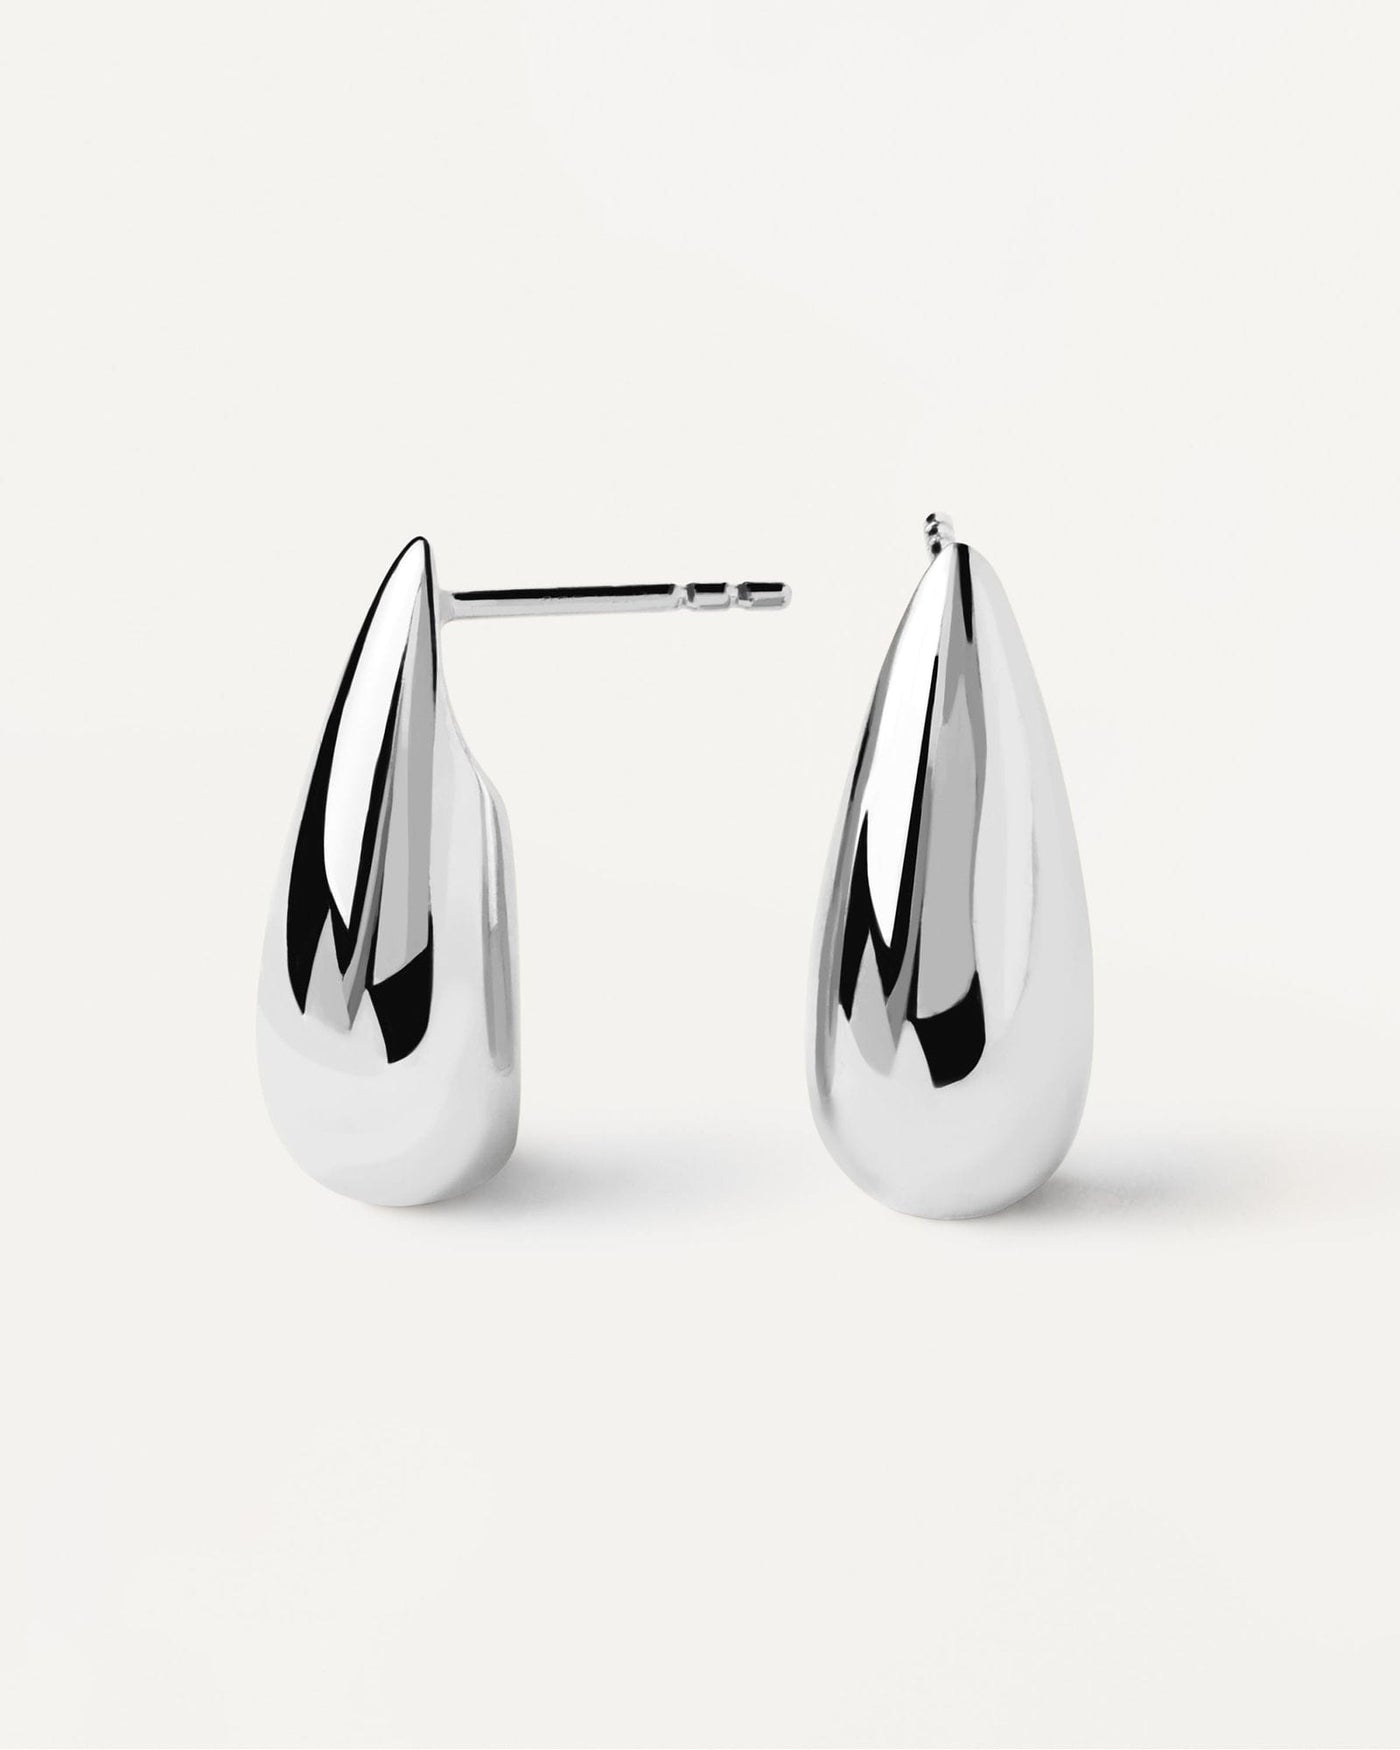 2024 Selection | Large Sugar Silver Earrings. Drop shaped stud earrings in sterling silver. Get the latest arrival from PDPAOLA. Place your order safely and get this Best Seller. Free Shipping.